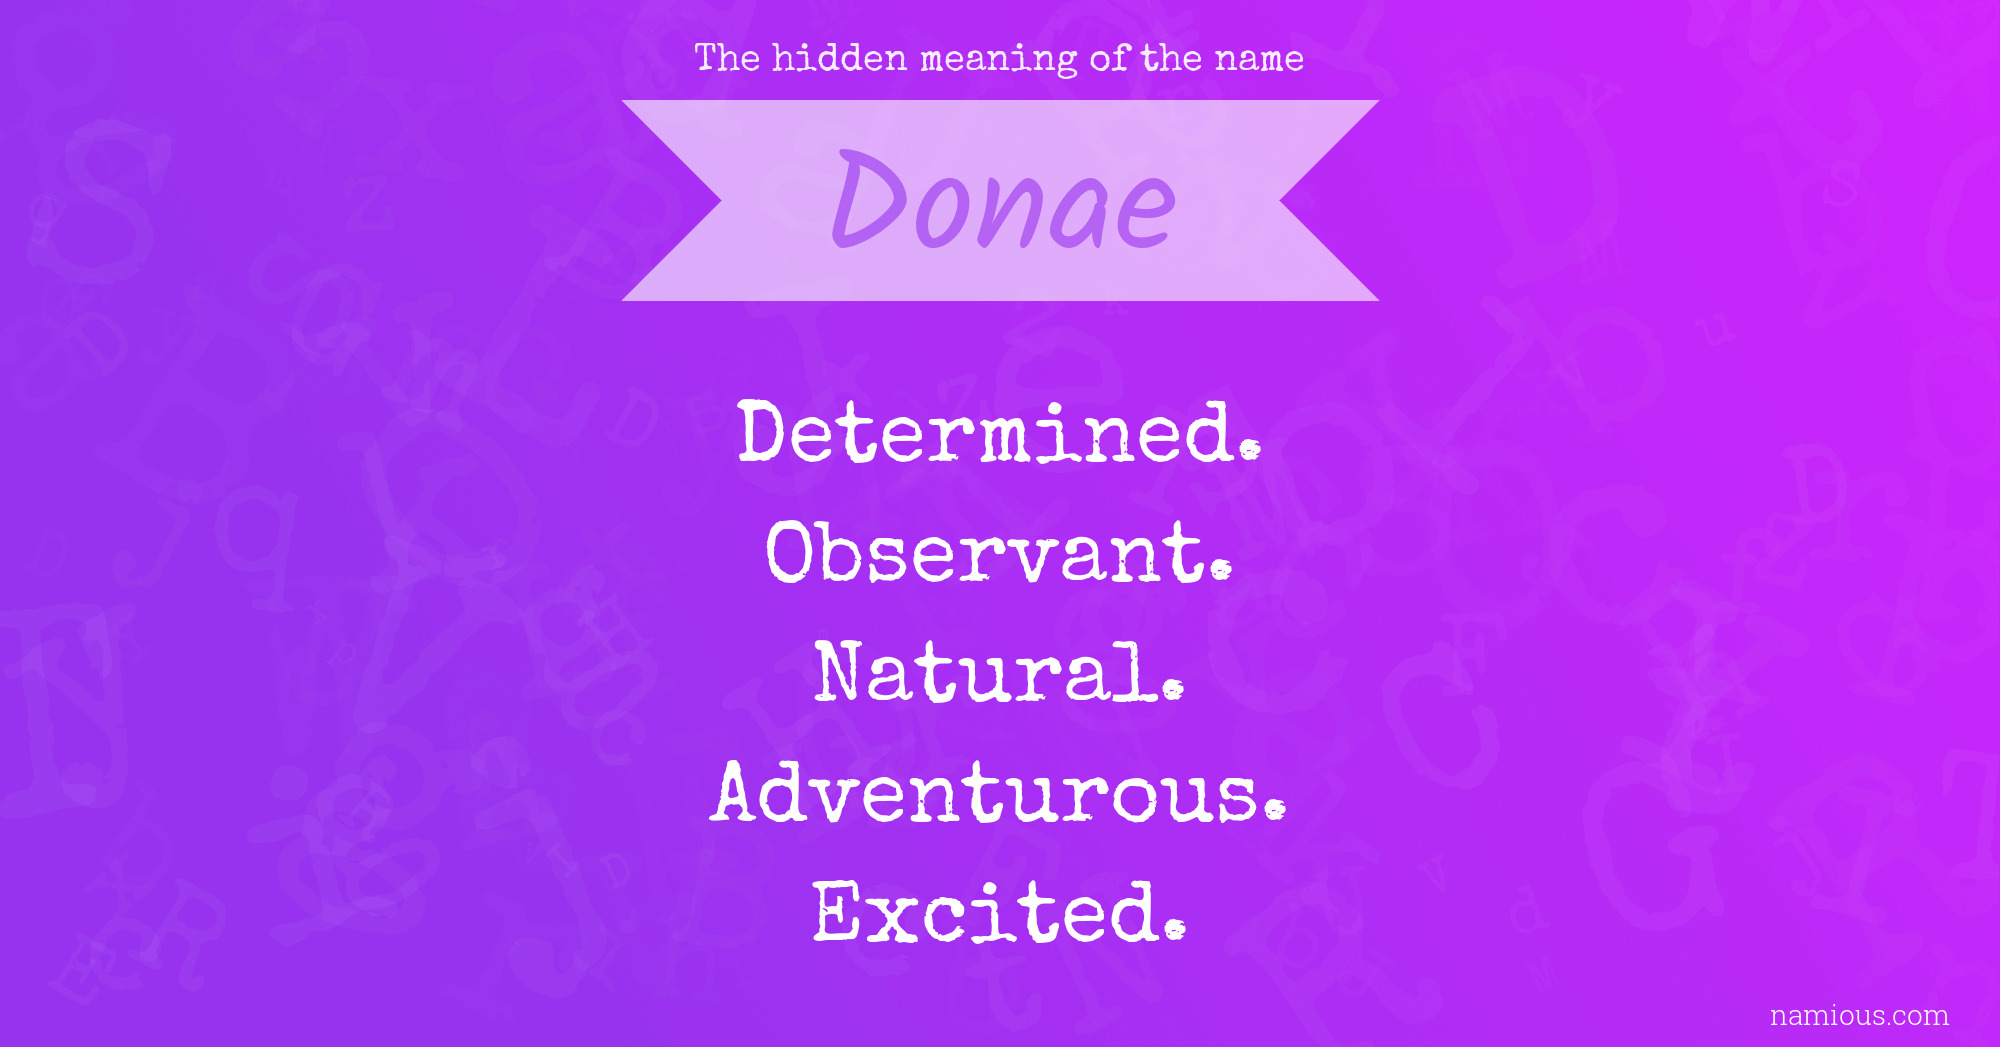 The hidden meaning of the name Donae